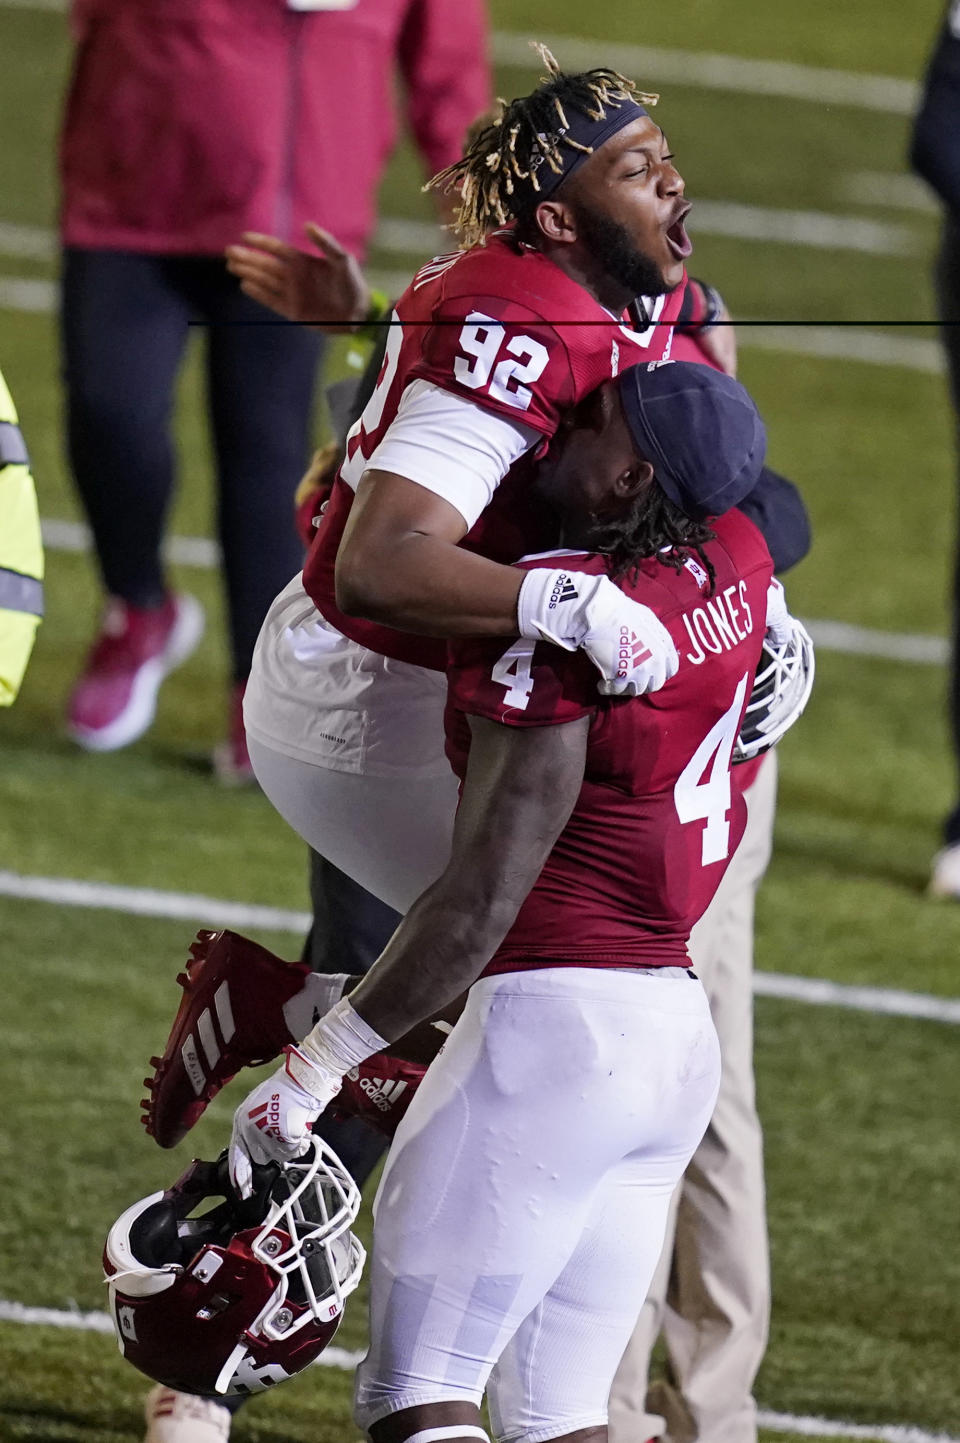 Indiana's Alfred Bryant (92) and Cam Jones celebrate after Indiana defeated Penn State in overtime of an NCAA college football game, Saturday, Oct. 24, 2020, in Bloomington, Ind. Indiana won 36-35 in overtime. (AP Photo/Darron Cummings)